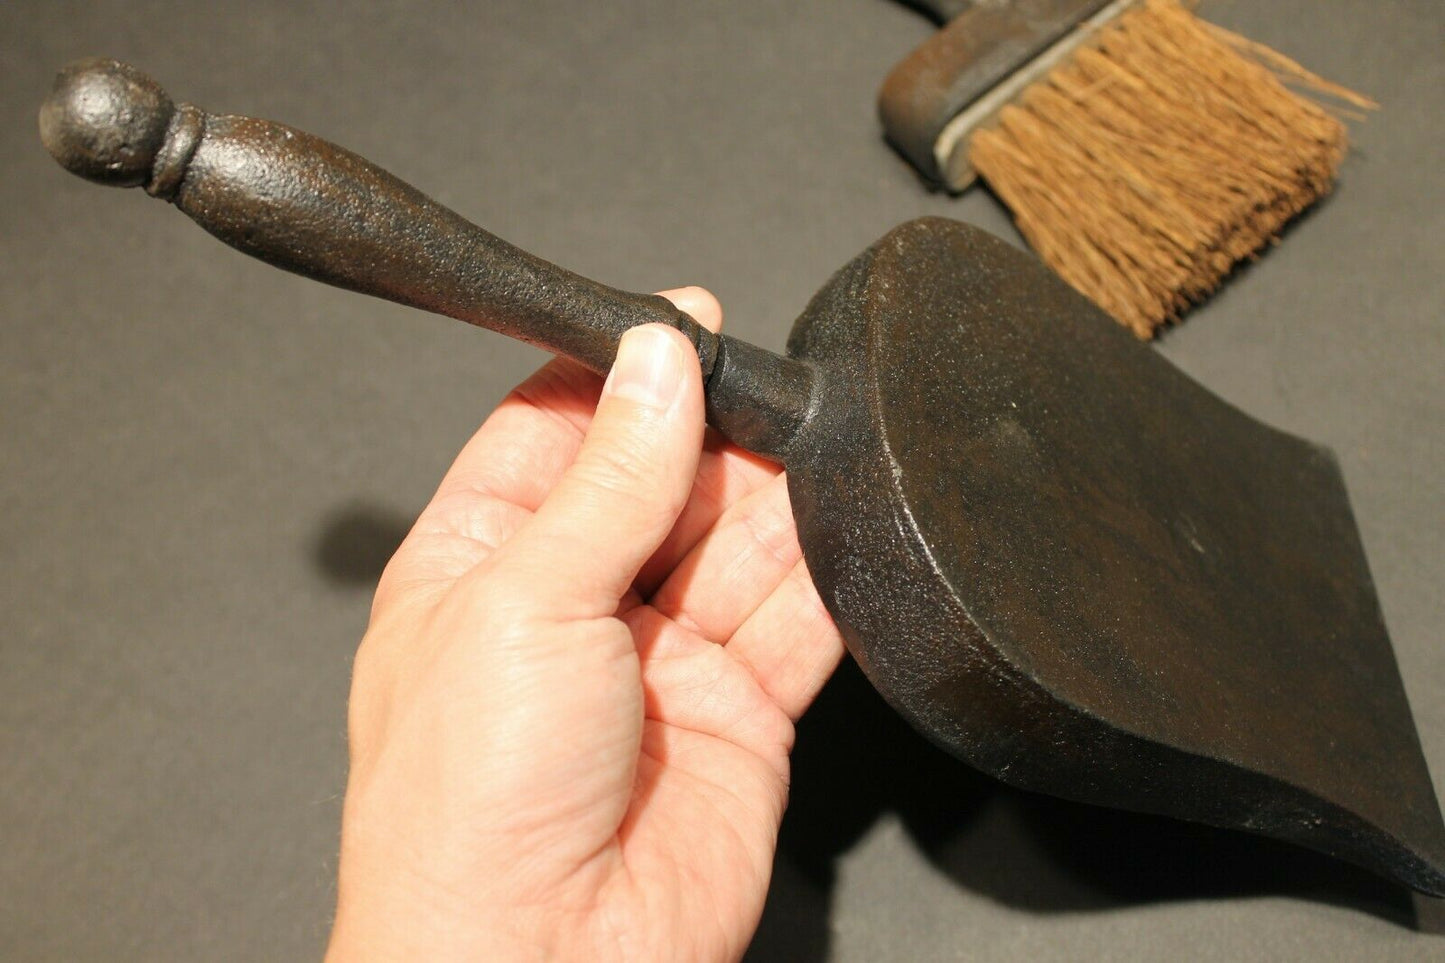 Antique Primitive Vintage Style Solid Cast Iron Fireplace Tools Dust Pan & Broom - Early Home Decor